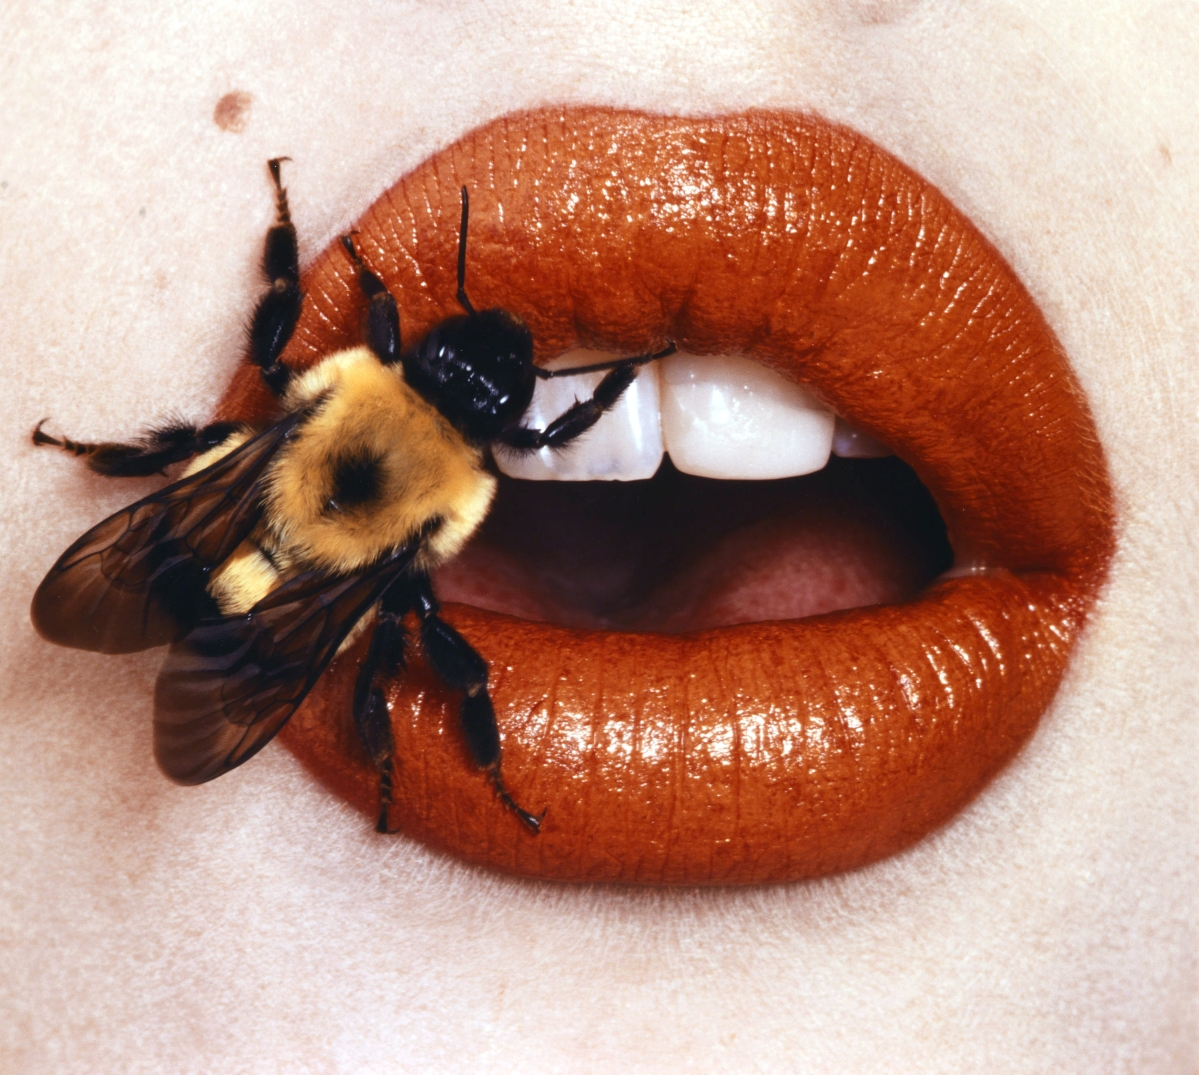 “Bee,” New York, 1995, printed 2001. Smithsonian American Art Museum, gift of The Irving Penn Foundation. ©The Irving Penn Foundation.  All works shown by Irving Penn.